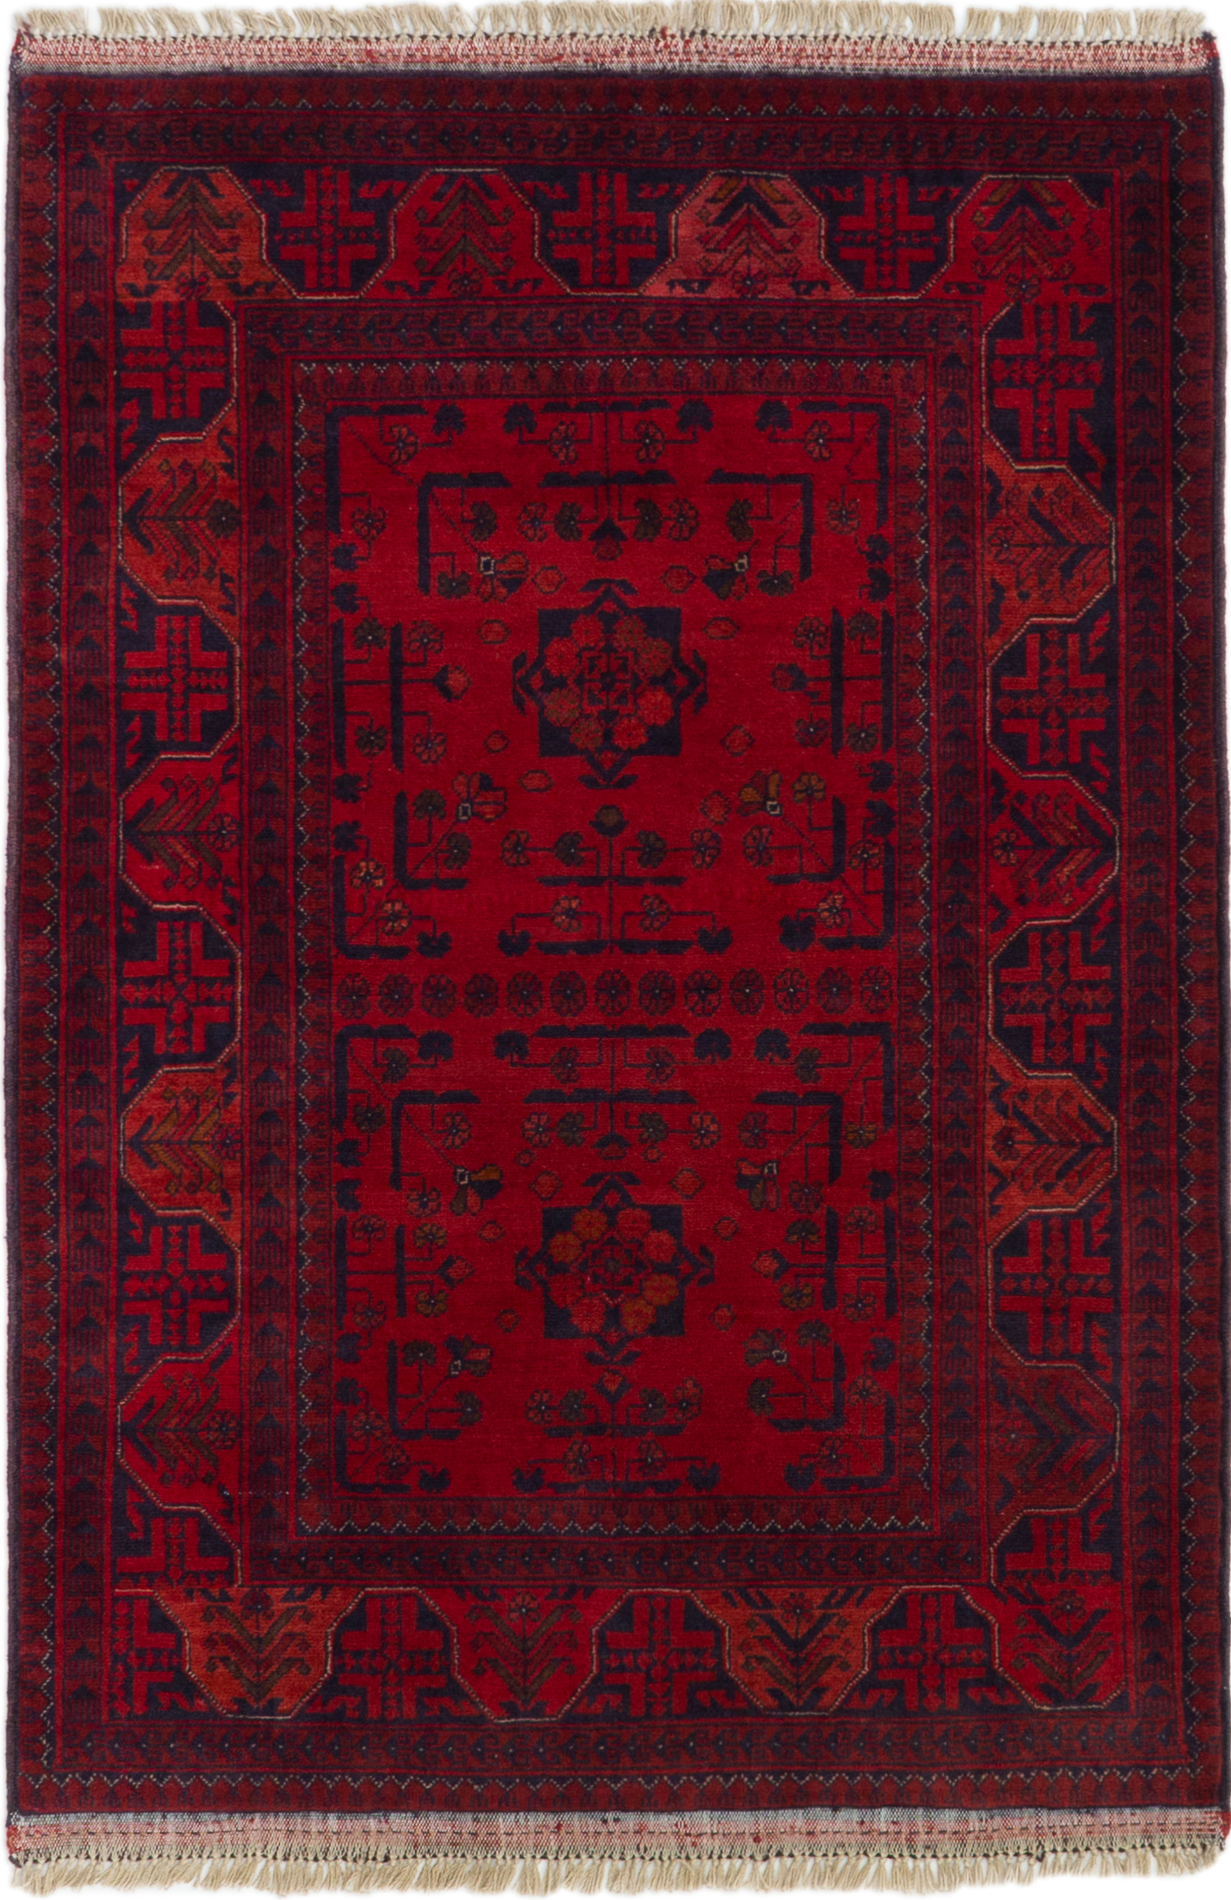 Hand-knotted Finest Khal Mohammadi Red Wool Rug 3'4" x 5'1"  Size: 3'4" x 5'1"  